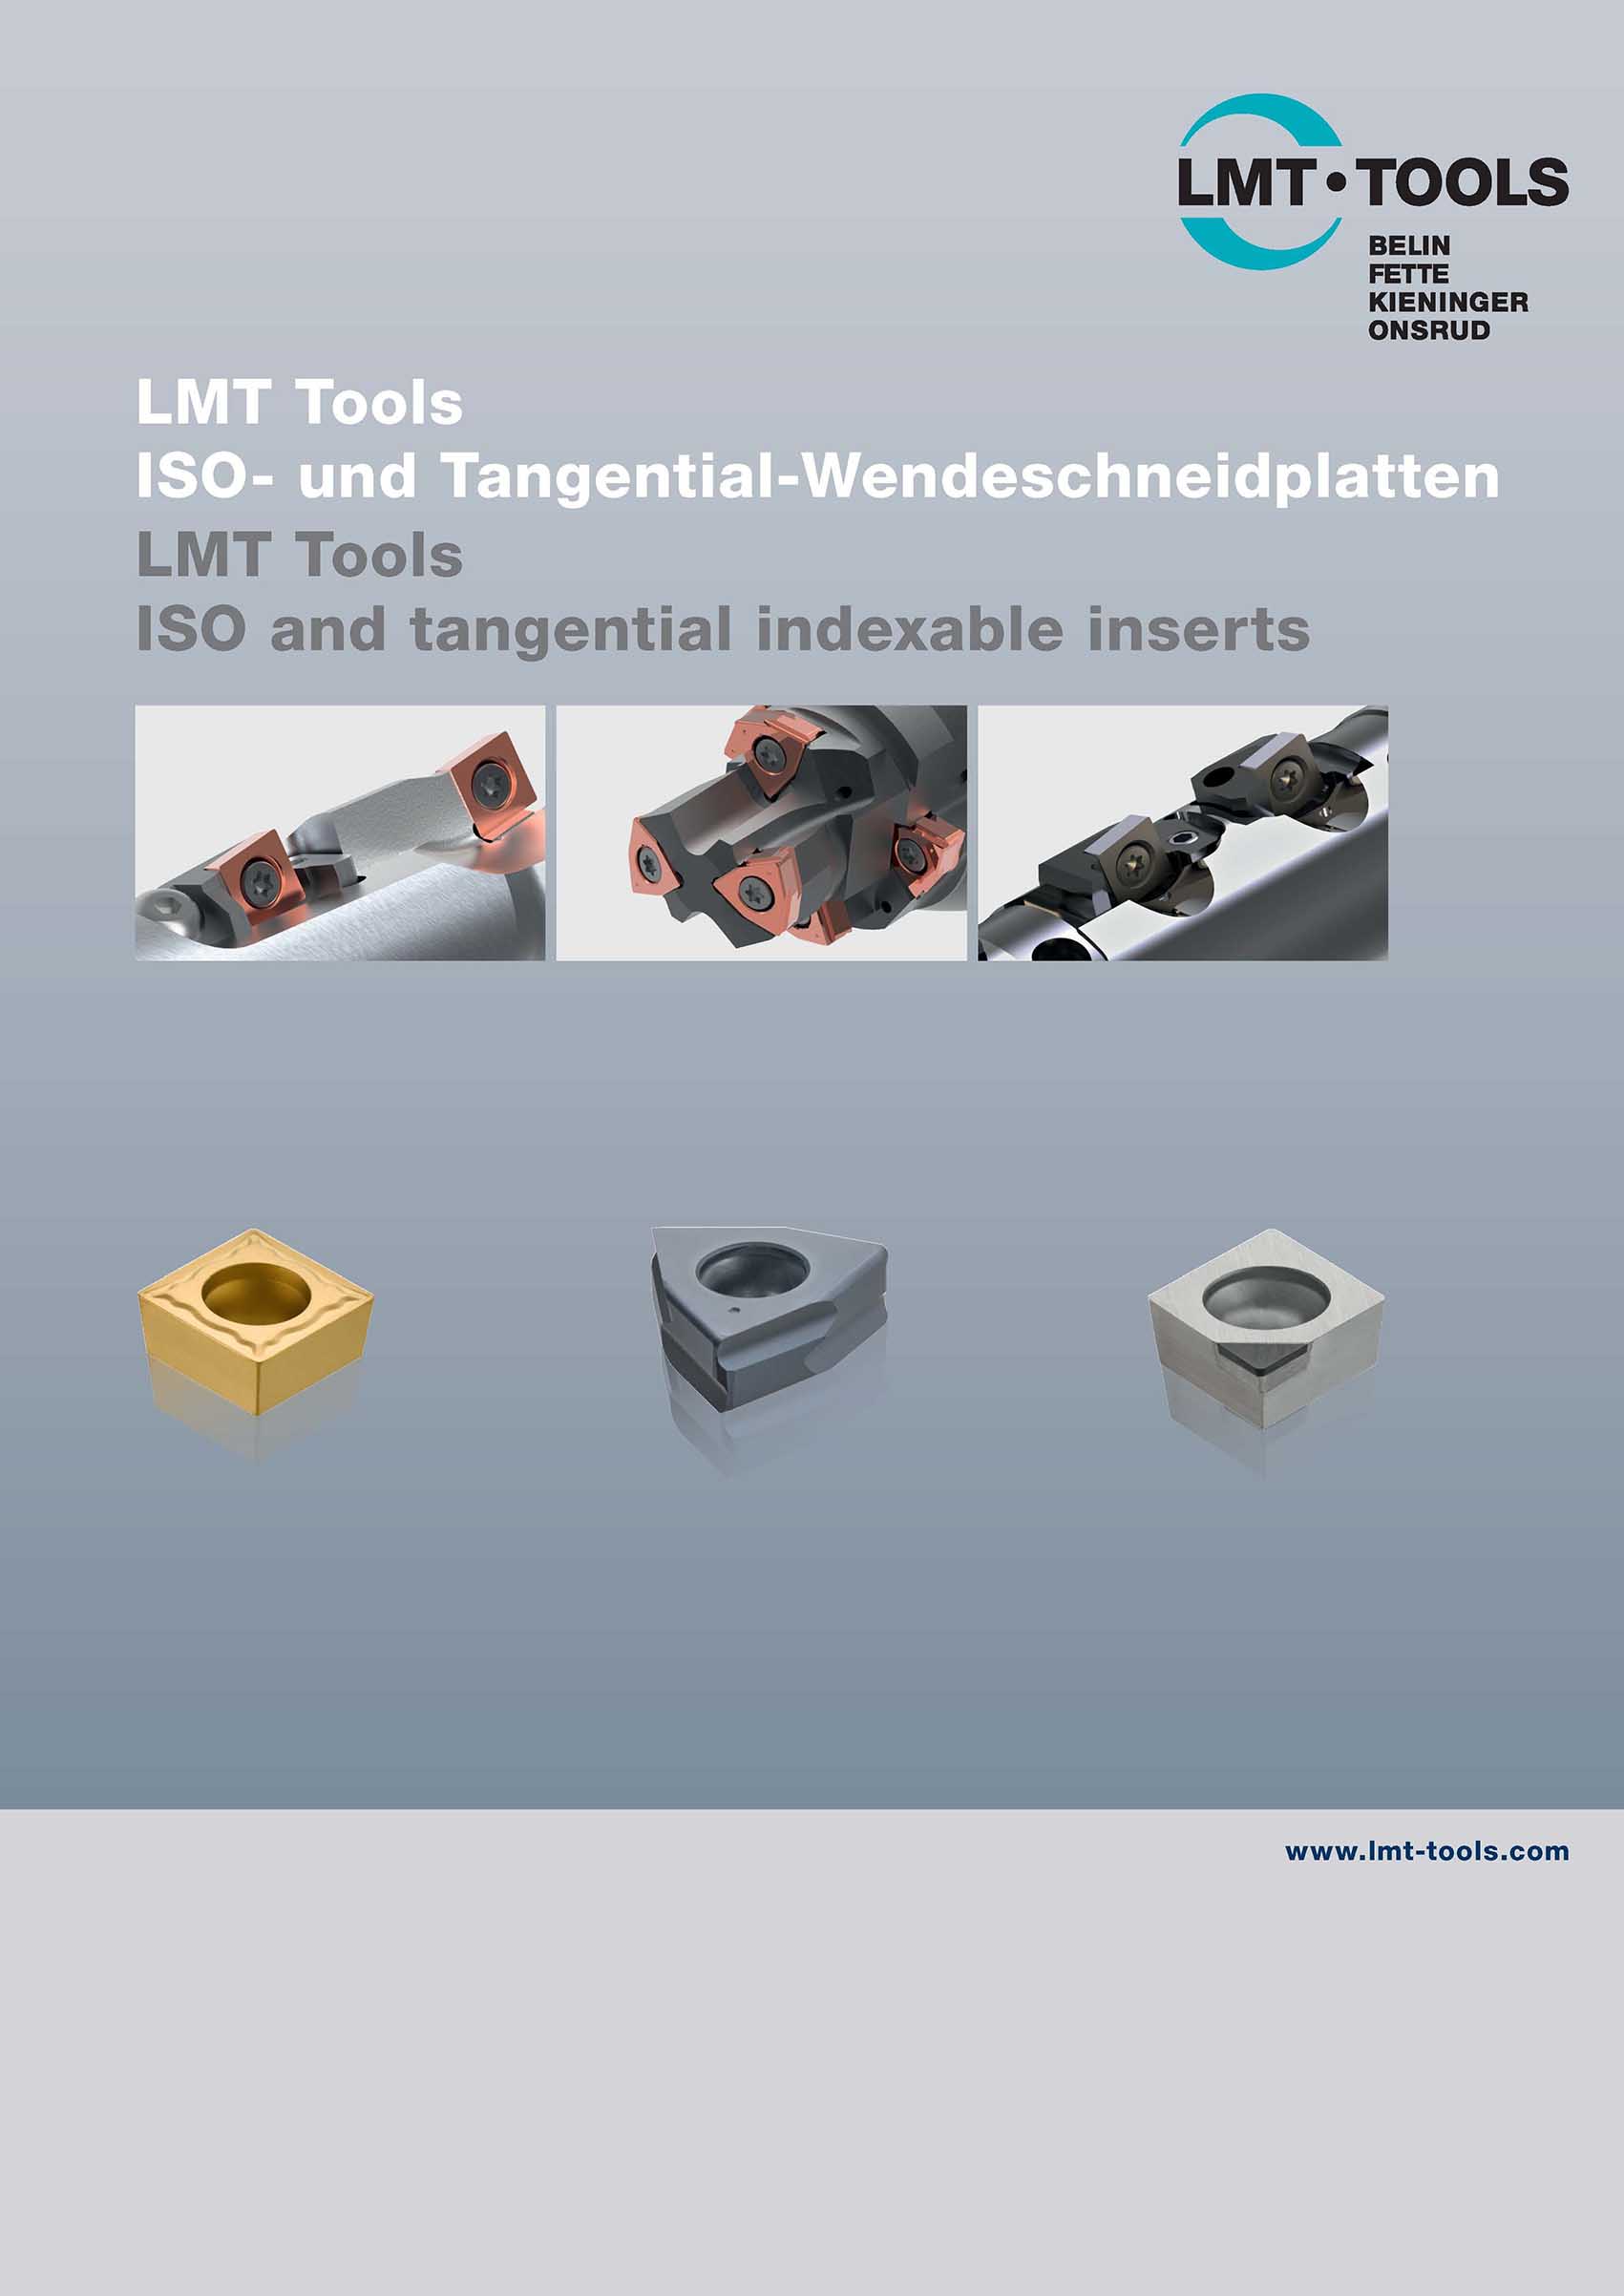 ISO and tangential indexable inserts